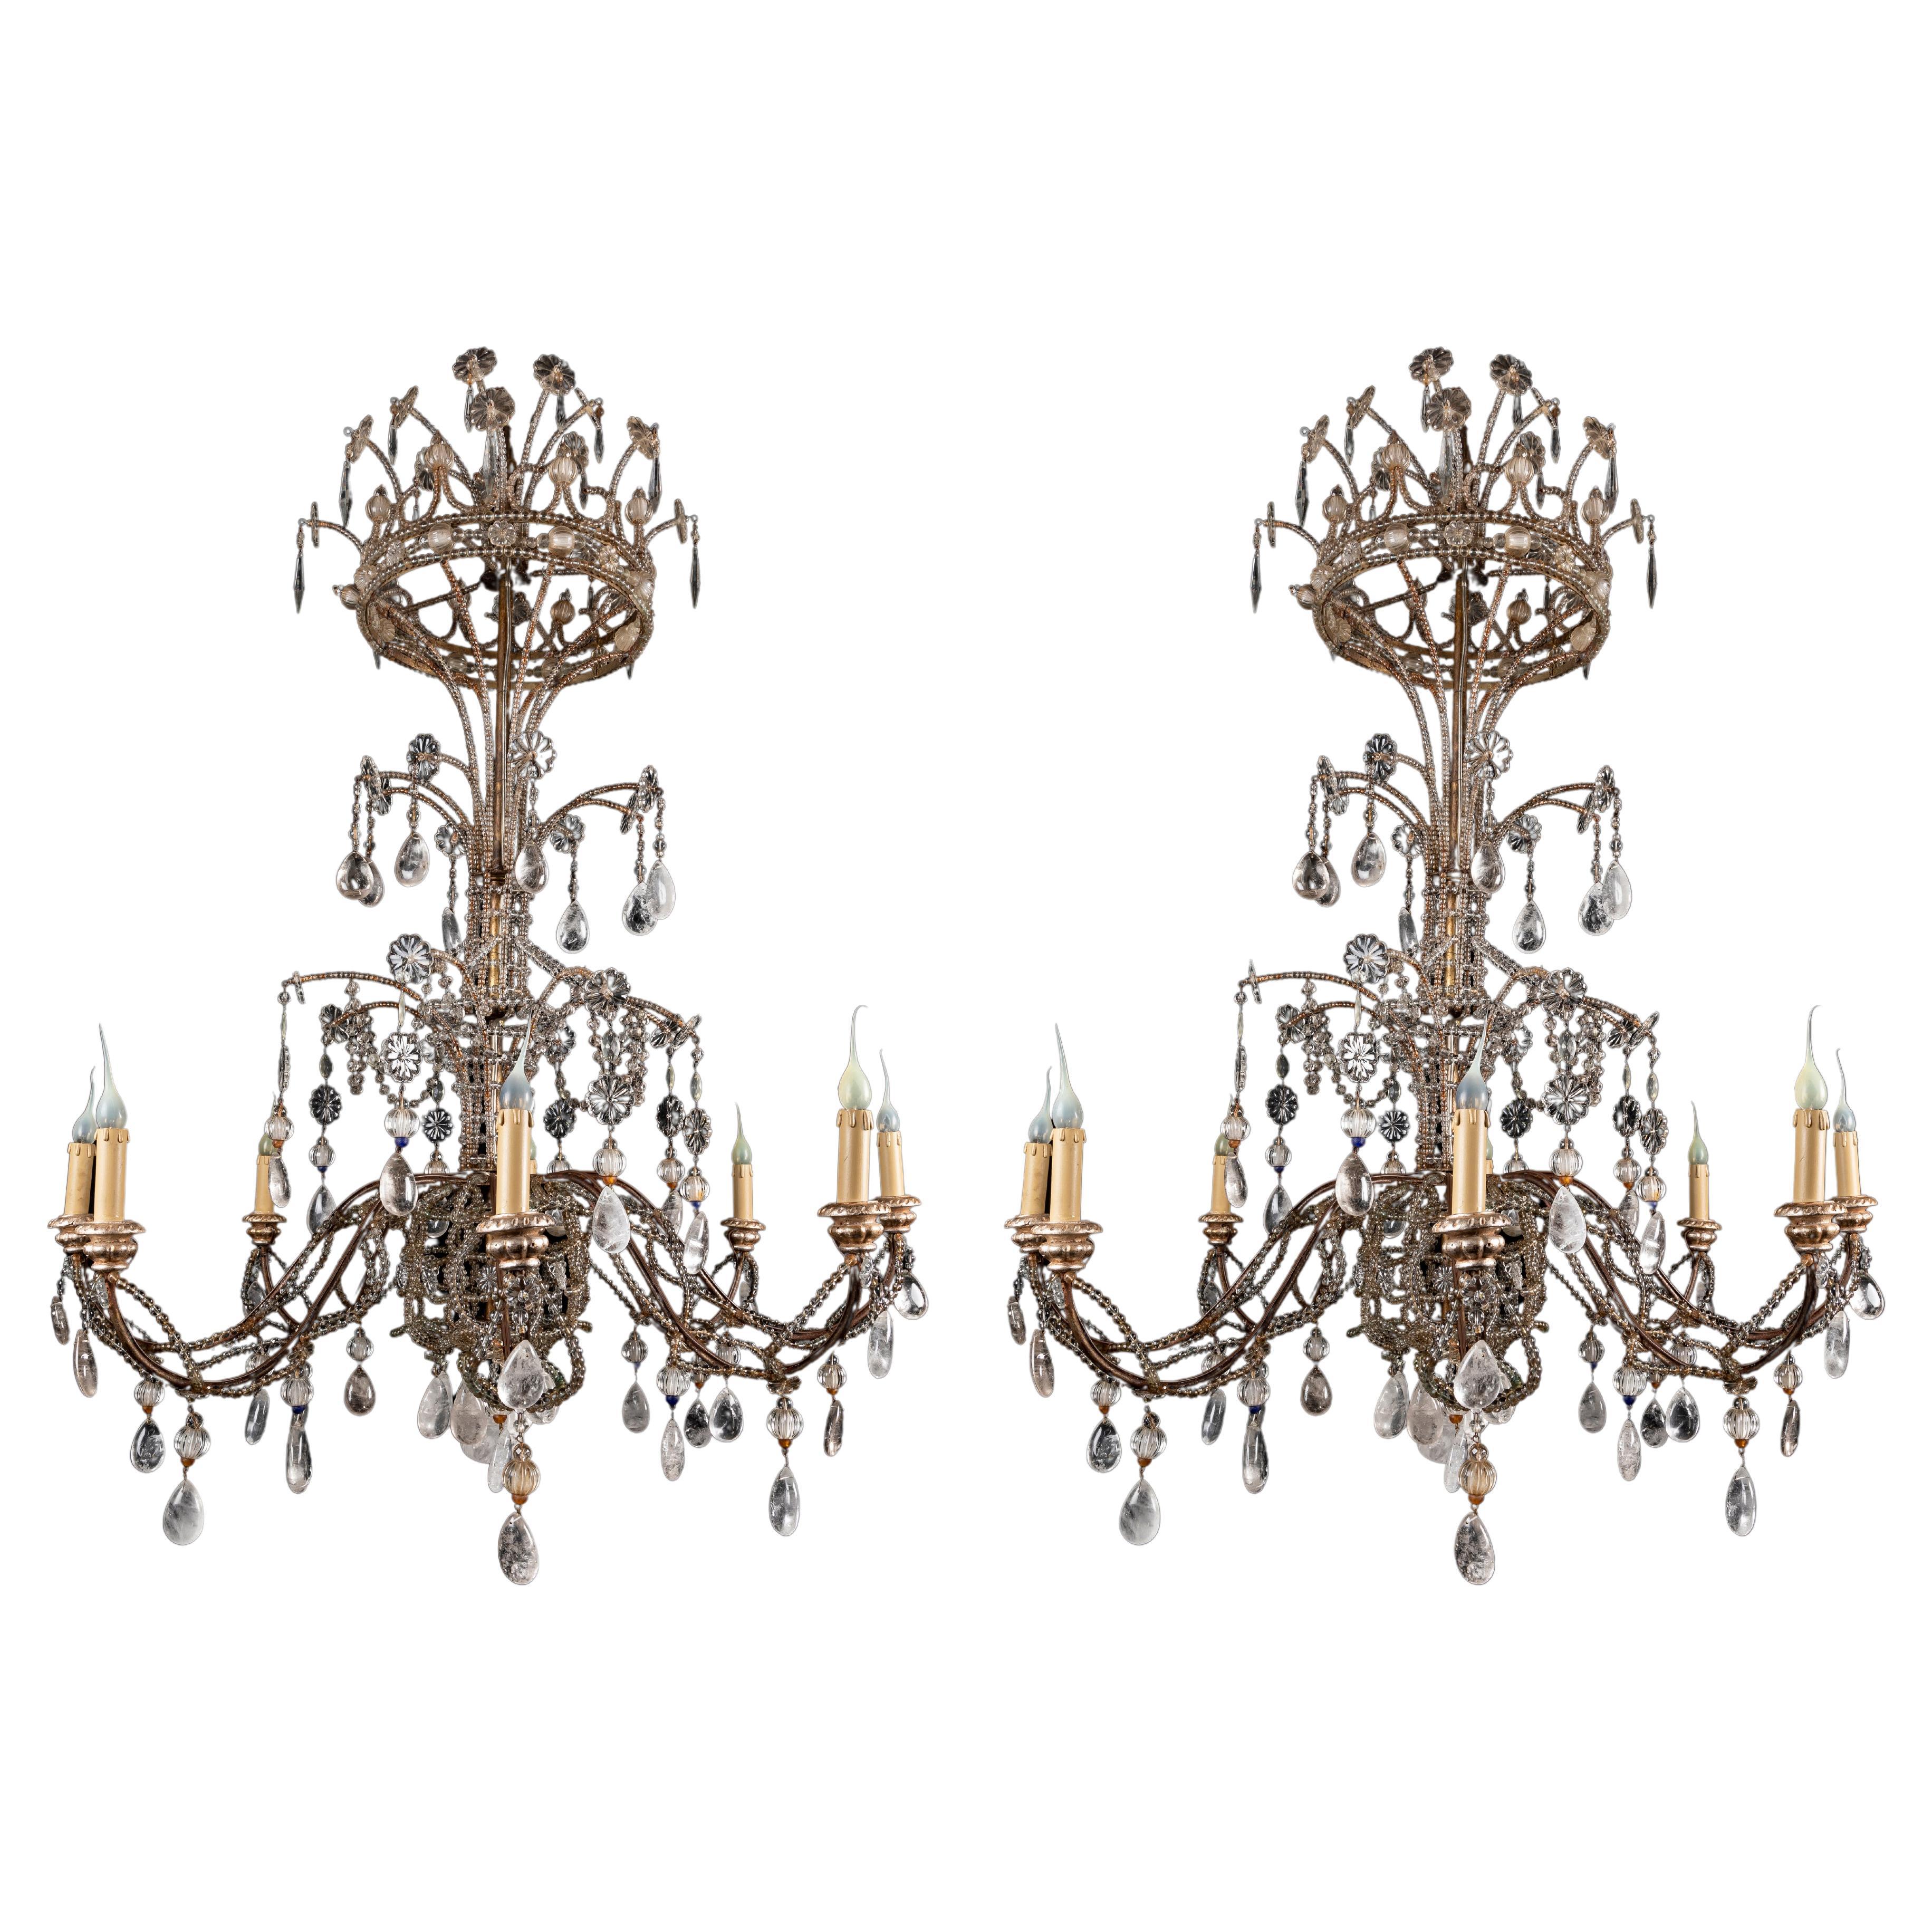 A Pair of Large Maison Bagues Rock Crystal Chandeliers